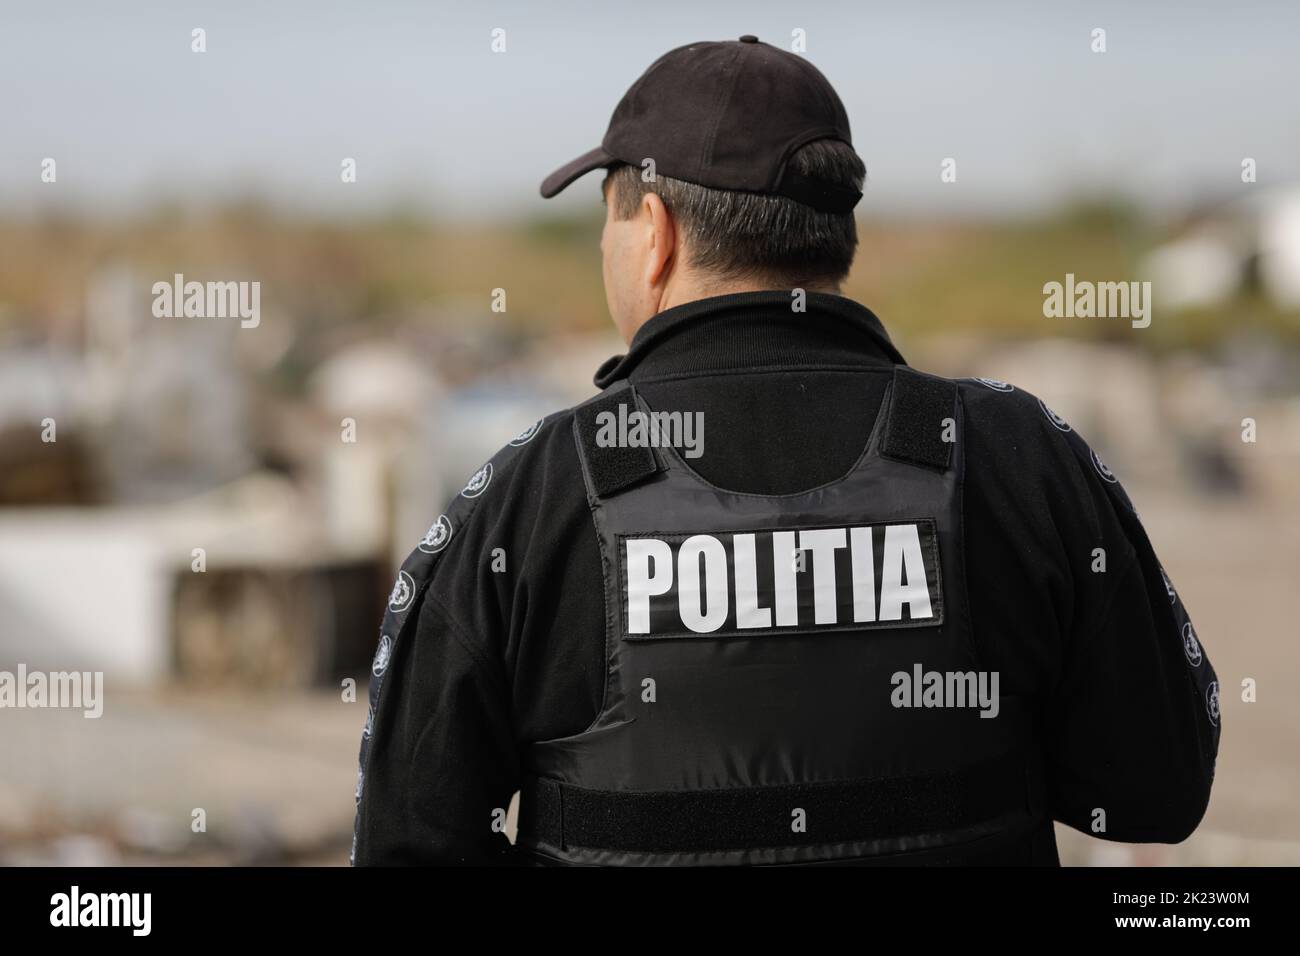 Sarulesti, Romania - September 22, 2022:  Romanian police officer. Banque D'Images